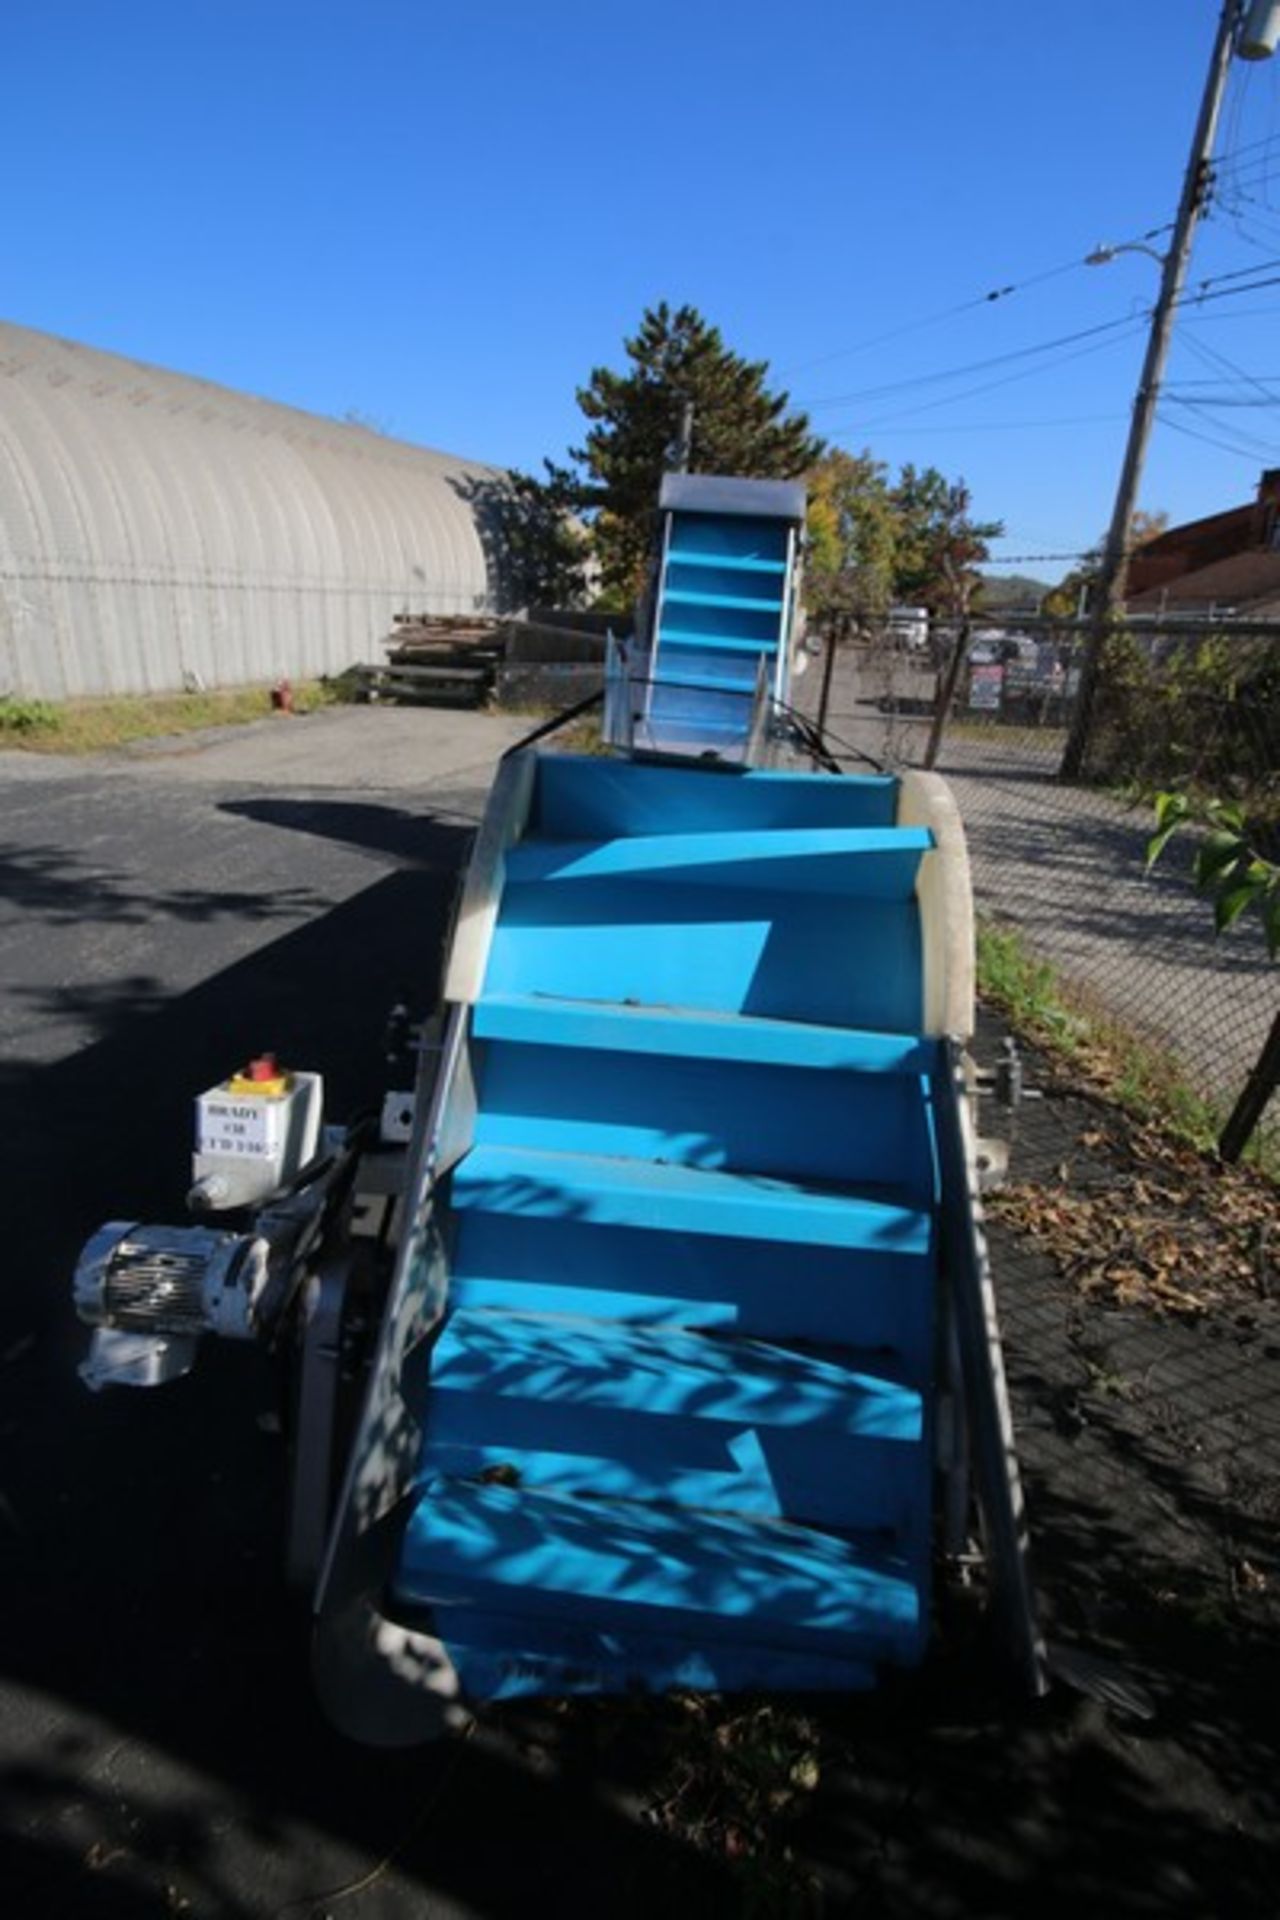 Smalley 15' H x 26" W S - Configured Inclined Conveyor, SN 17344-02, with Flights, 3/4 hp Drive - Image 2 of 7